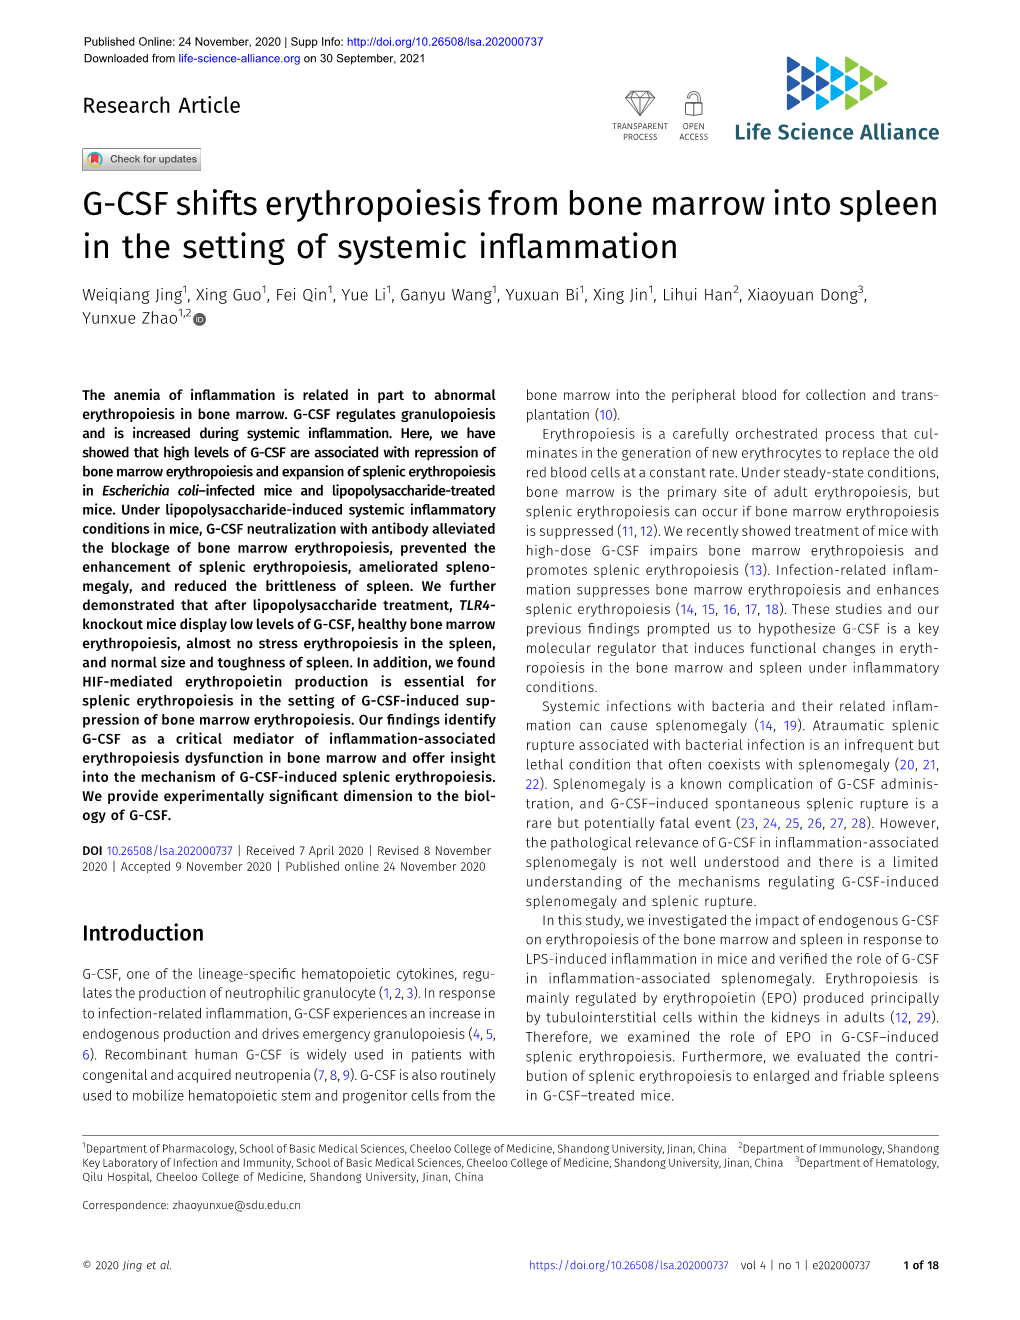 G-CSF Shifts Erythropoiesis from Bone Marrow Into Spleen in the Setting of Systemic Inﬂammation